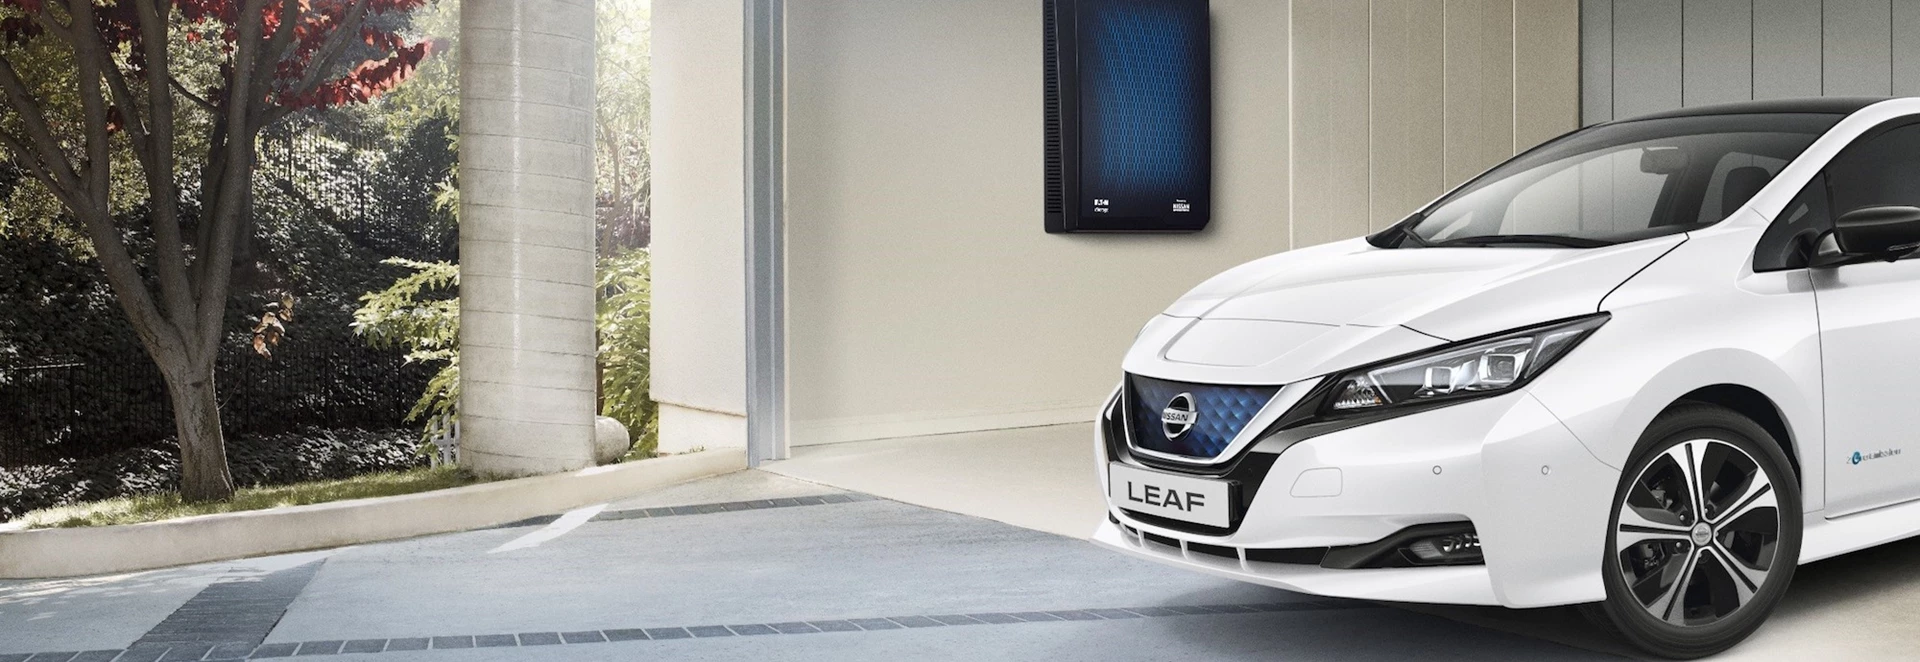 Nissan takes ‘Excellence in Climate Solutions’ award for pioneering electric technology